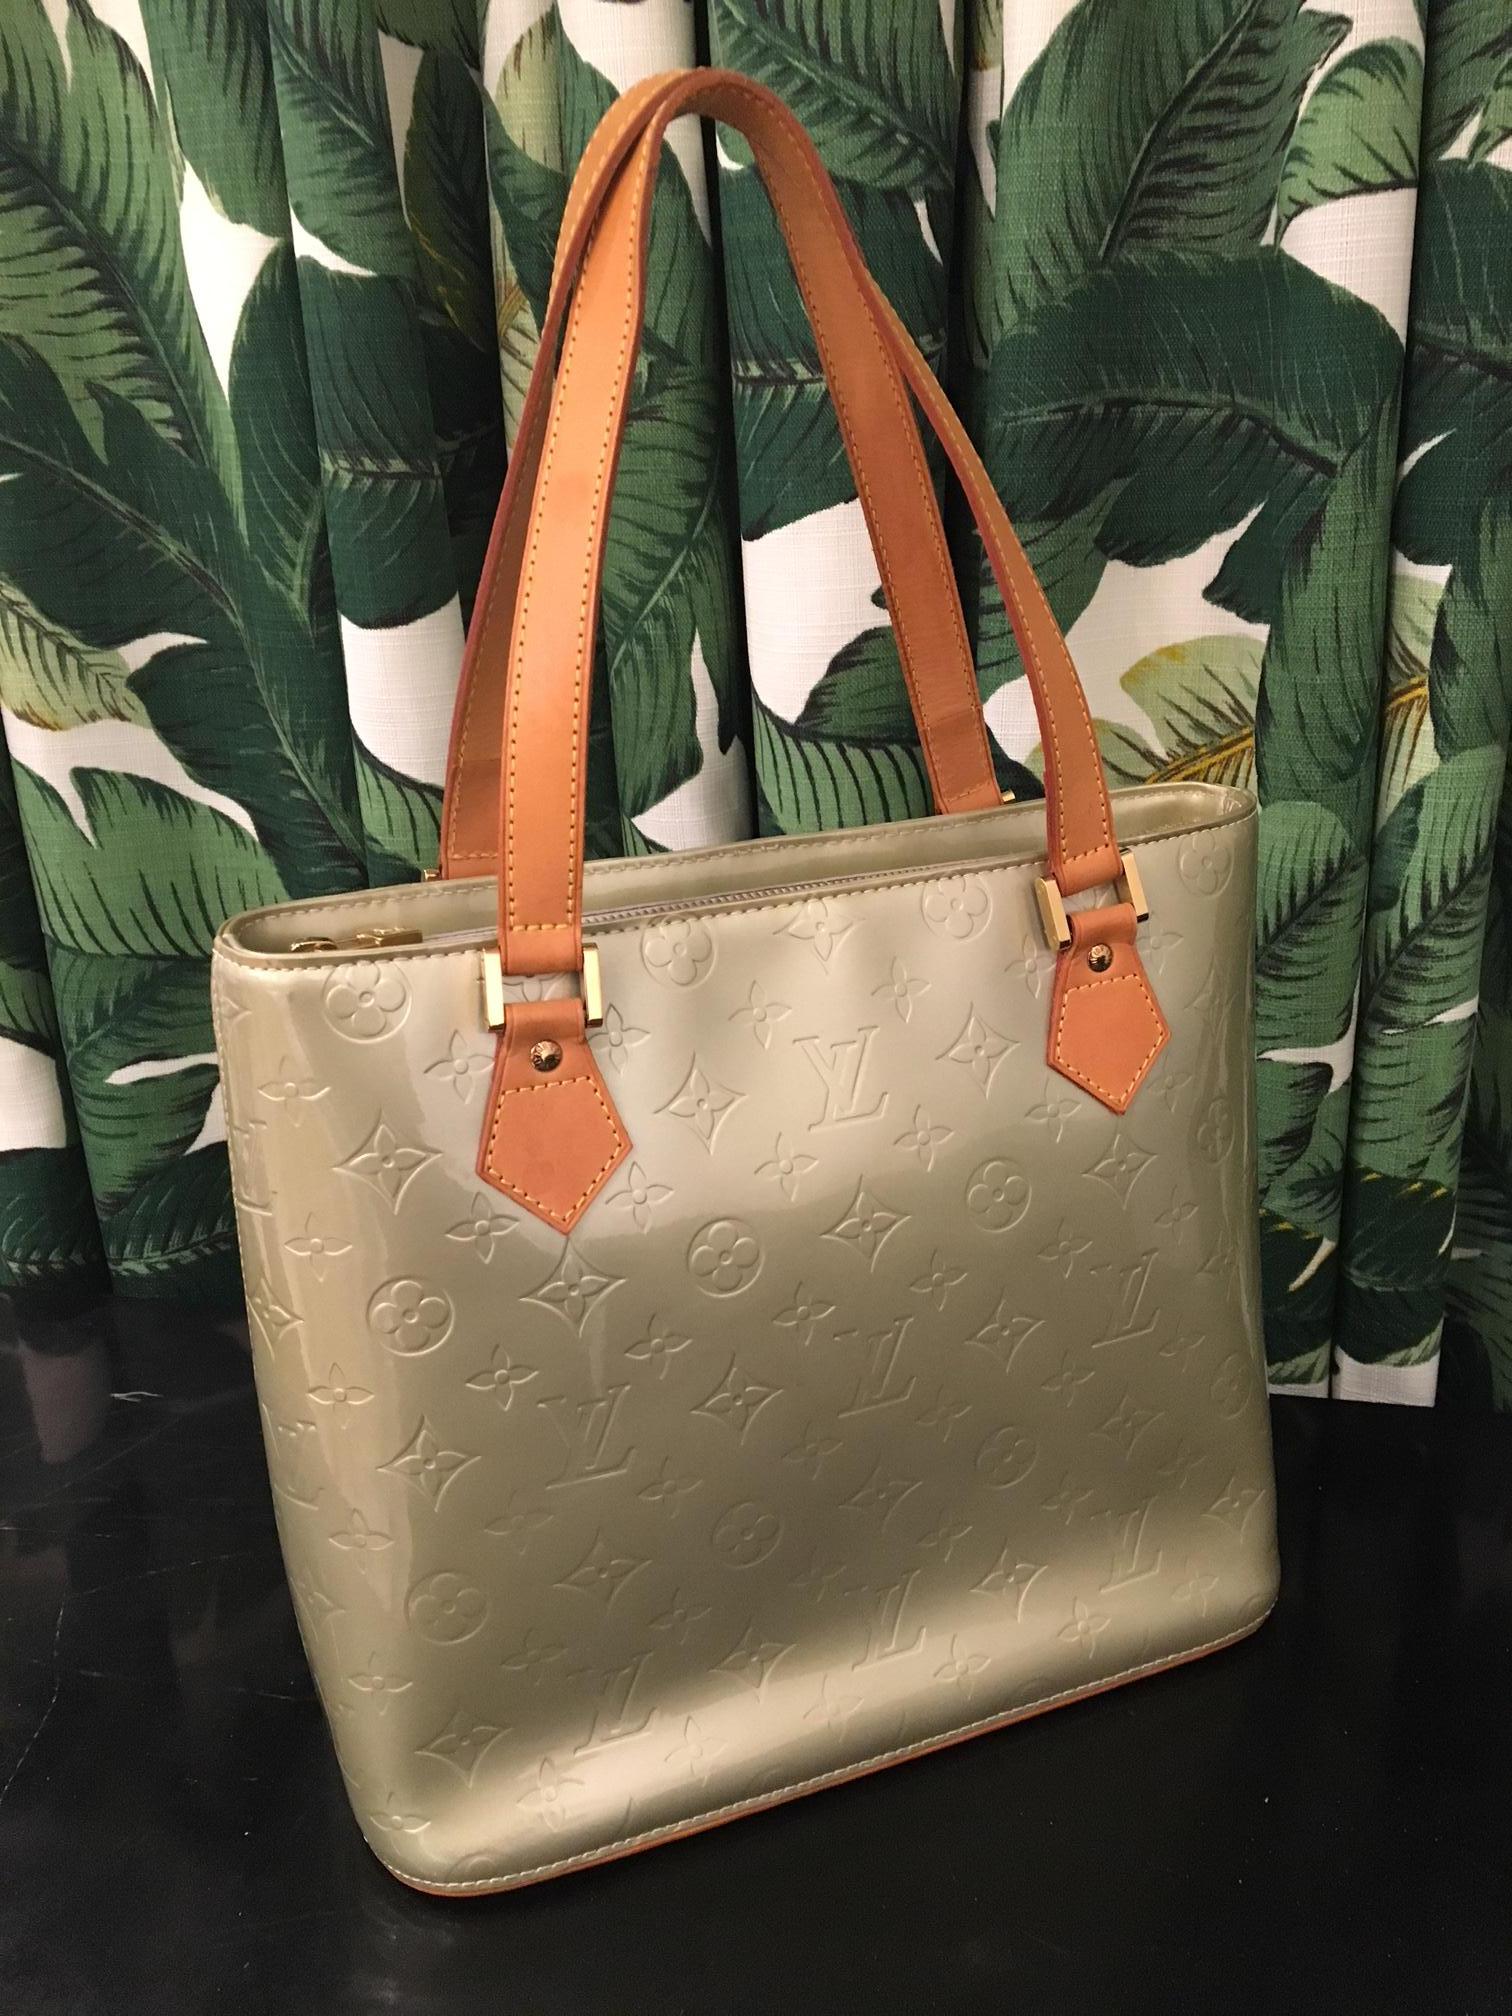 Vernis Houston tote by Louis Vuitton in silver leather with brown leather straps and accents. Flat handles and gold hardware. Large interior lined with leather and interior zipper pocket.


Dimensions: 12” (W) x 10” (H) x 6” (D) Handle Drop: